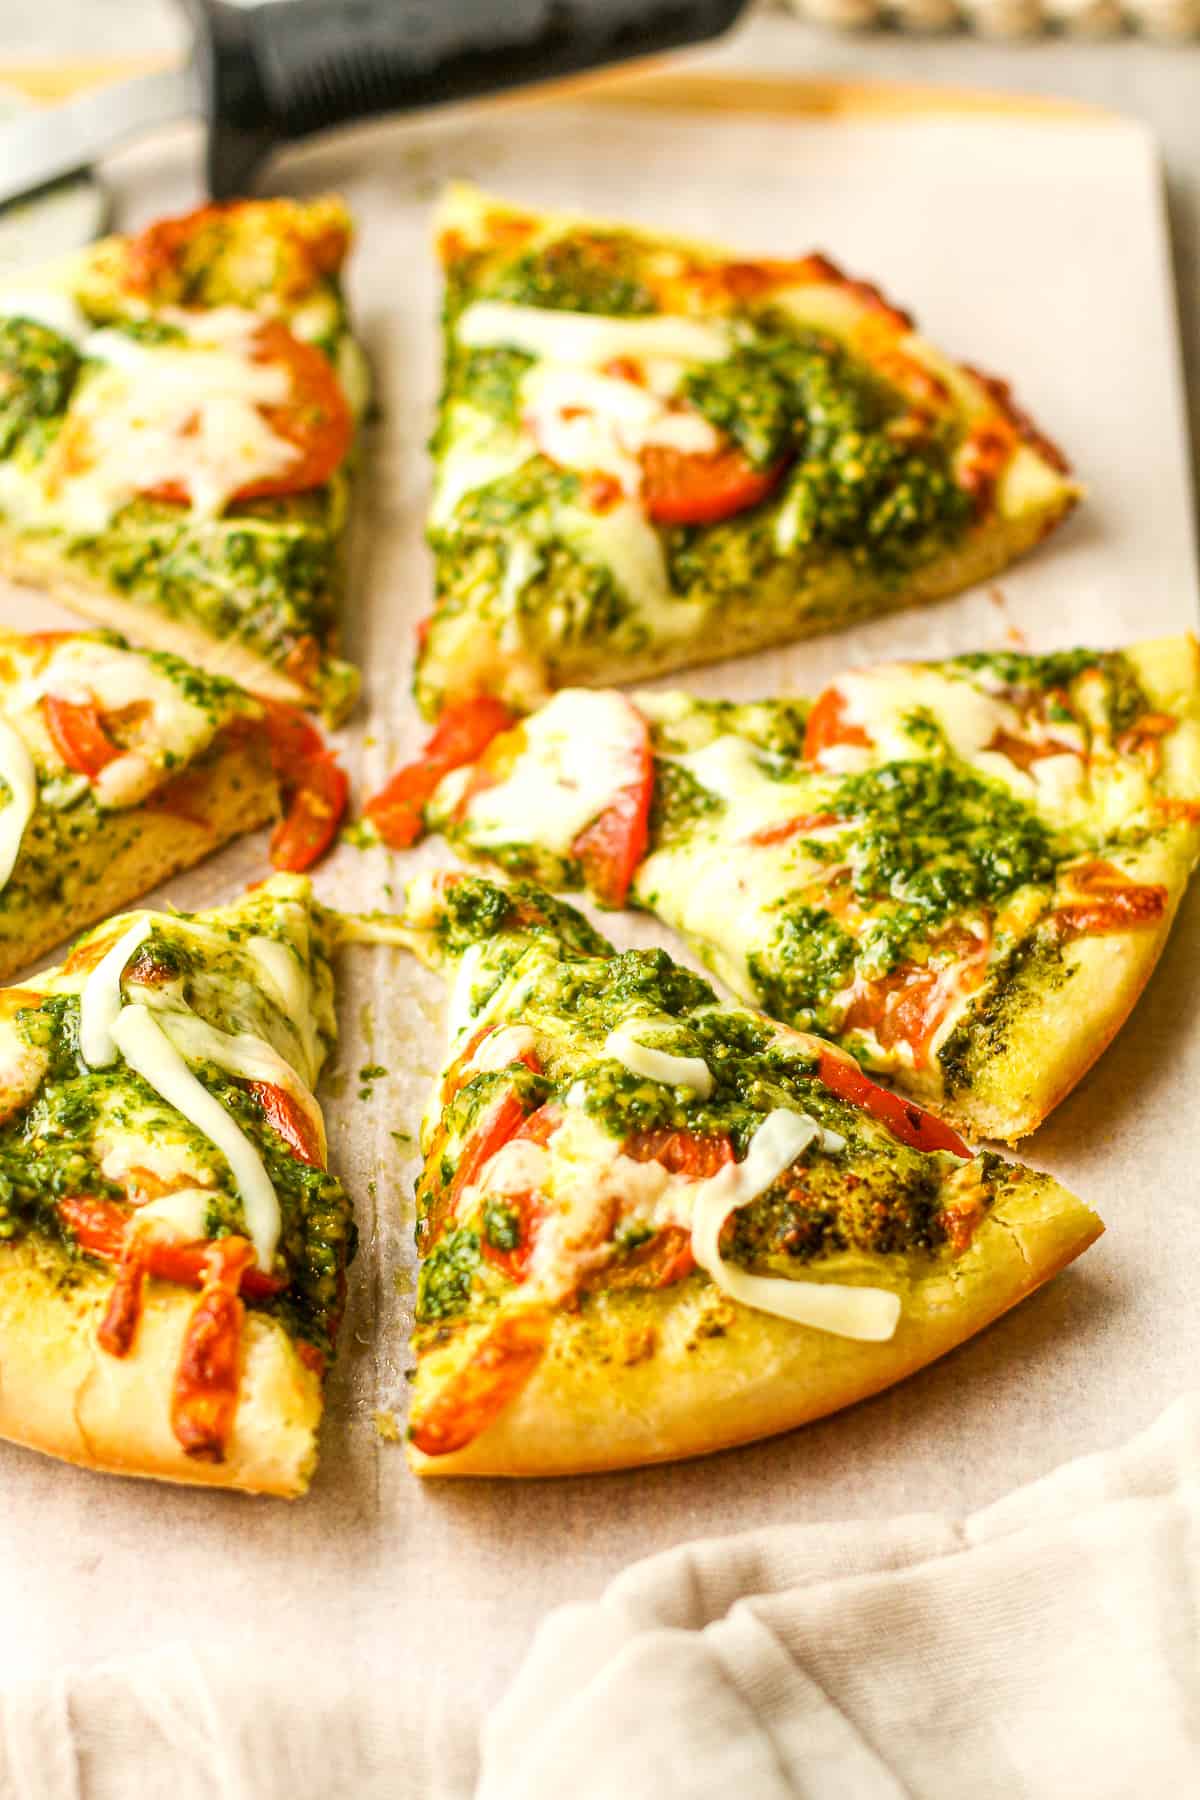 Side view of some slices of pesto pizza.